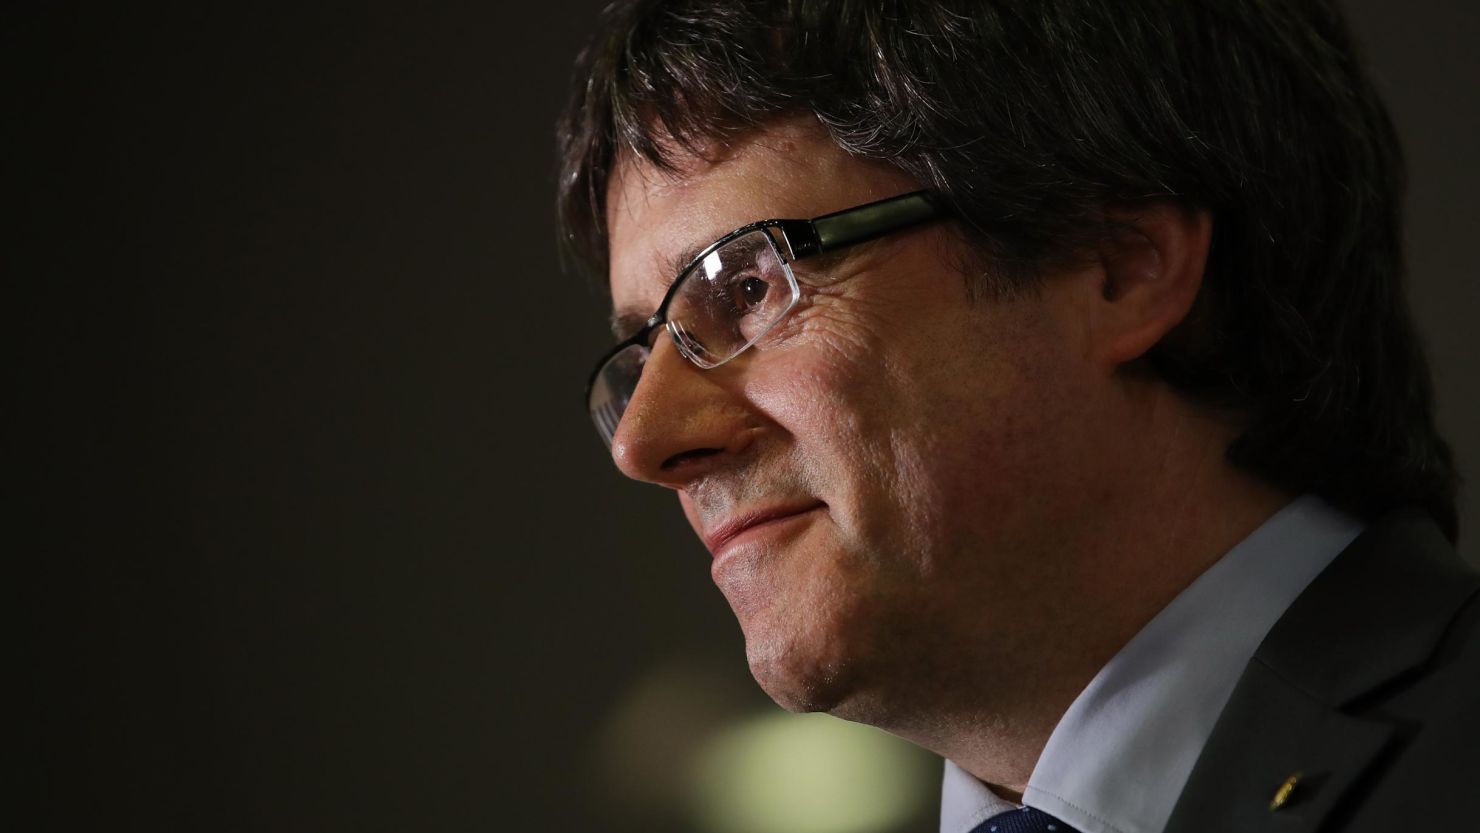 Former Catalan leader Carles Puigdemont attends a press conference with newly-elected Catalan leader Quim Torra (not pictured) in May in Berlin, Germany.